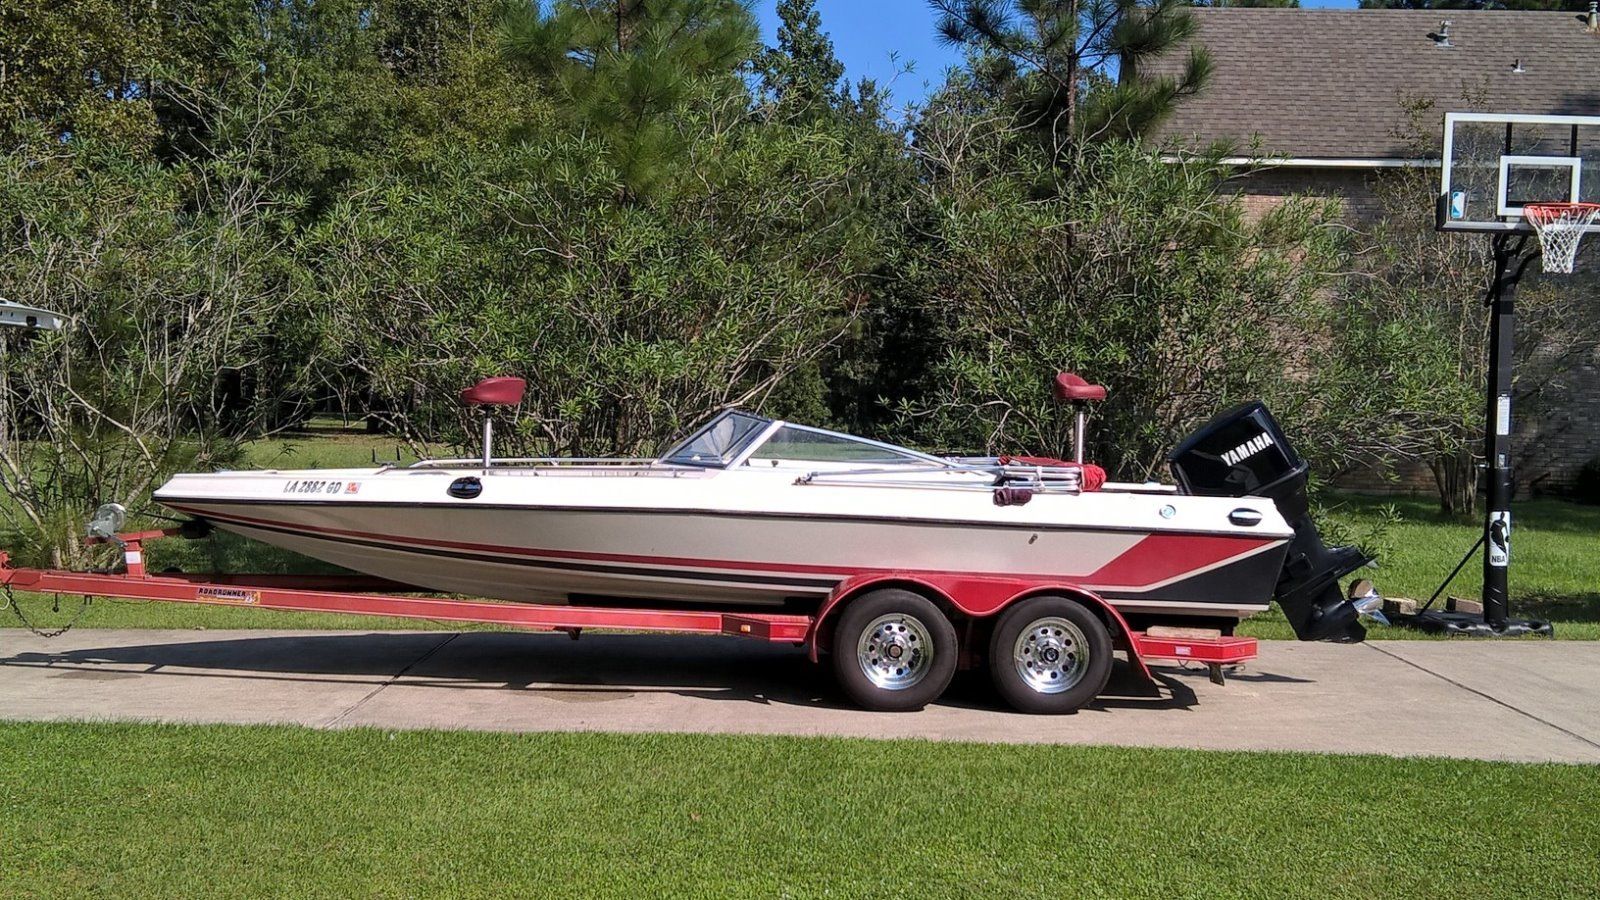 Baja Fish And Ski 1998 for sale for $1,000 - Boats-from-USA.com